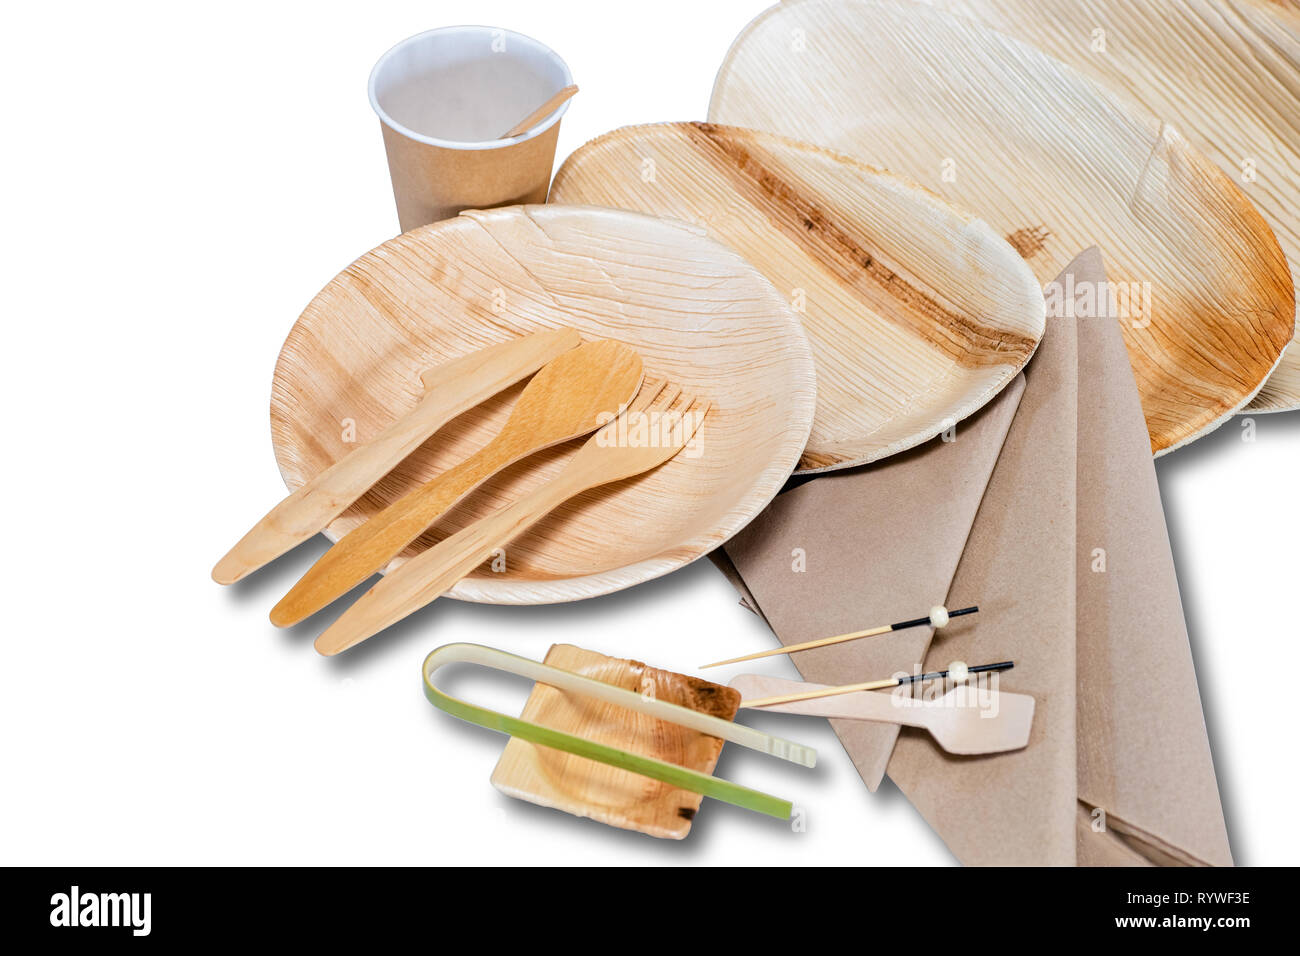 https://c8.alamy.com/comp/RYWF3E/bamboo-disposable-tableware-with-plates-and-cutlery-for-picnic-on-the-white-background-RYWF3E.jpg